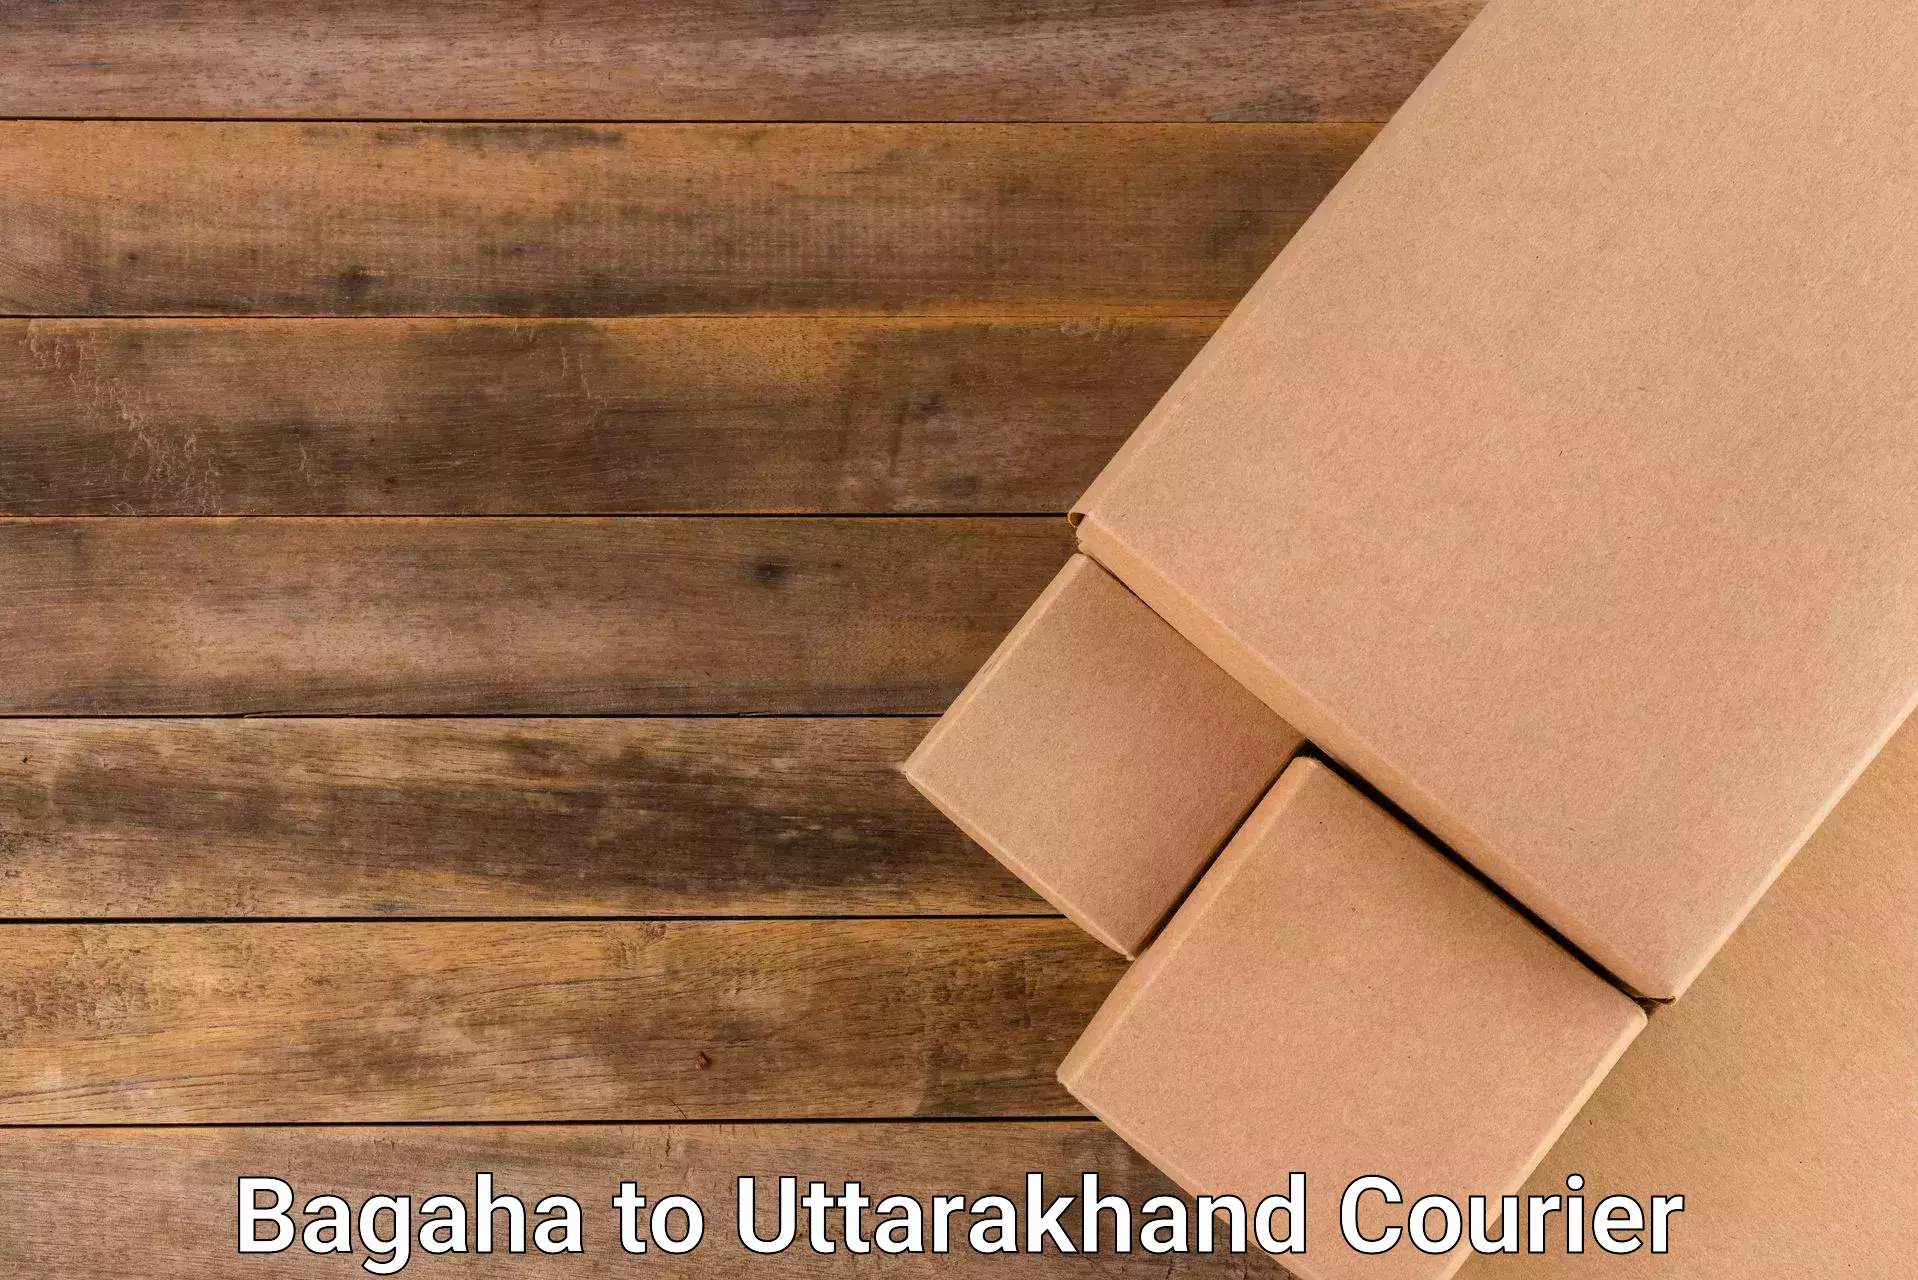 Overnight delivery services Bagaha to Uttarakhand